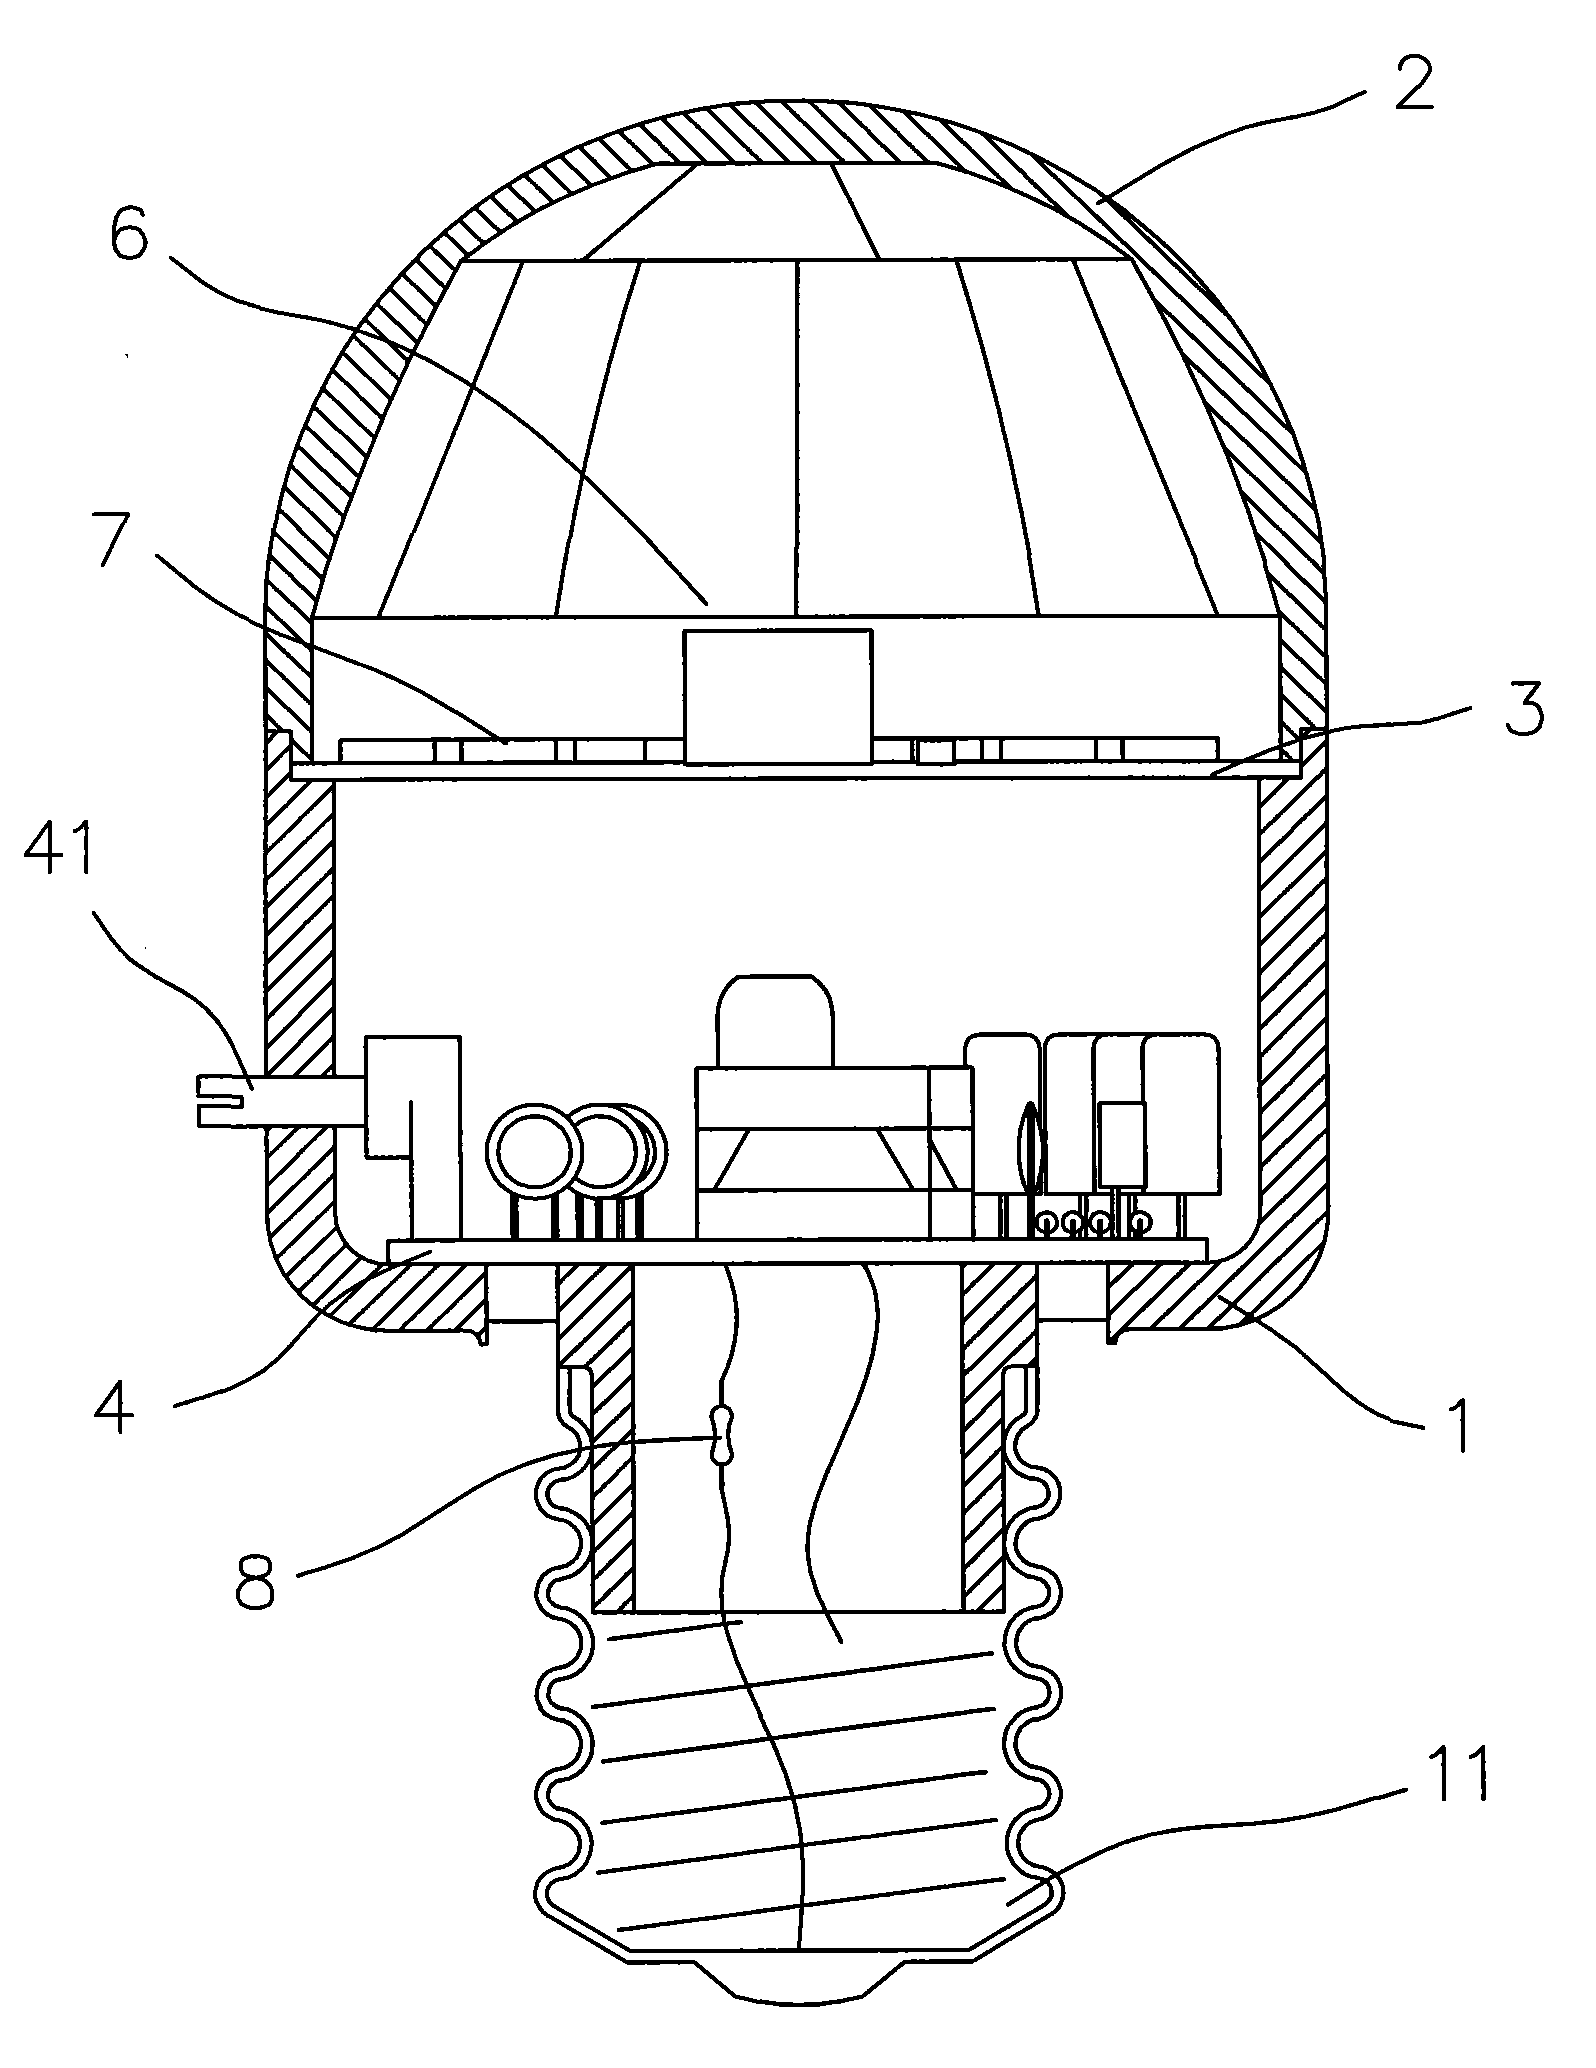 Light-emitting device with sensing function